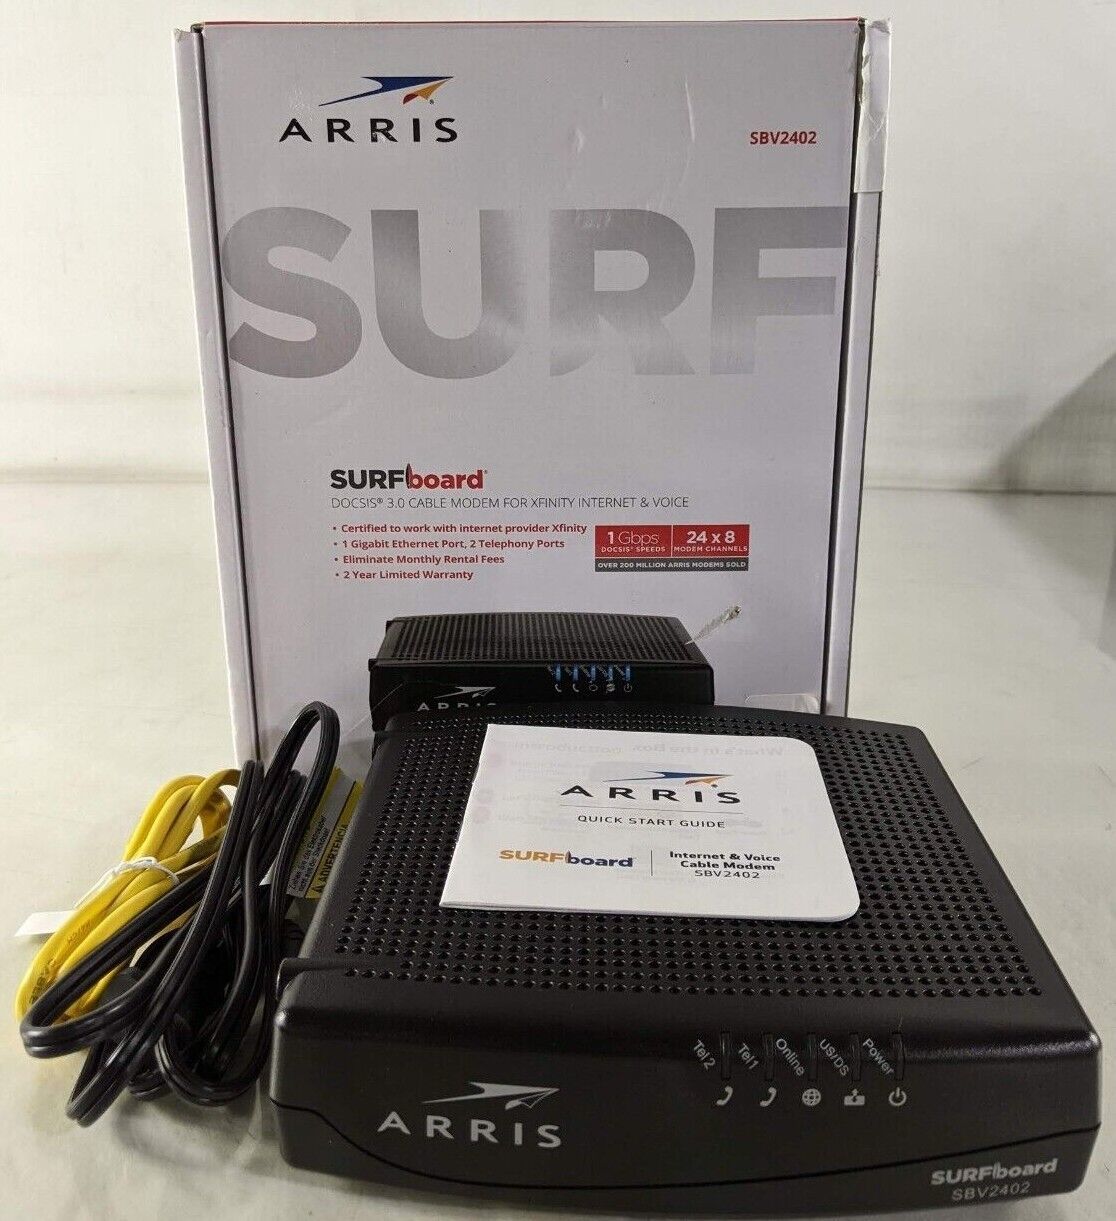 ARRIS Surfboard SBV2402 DOCSIS 3.0 Cable Modem Certified for Xfinity ...